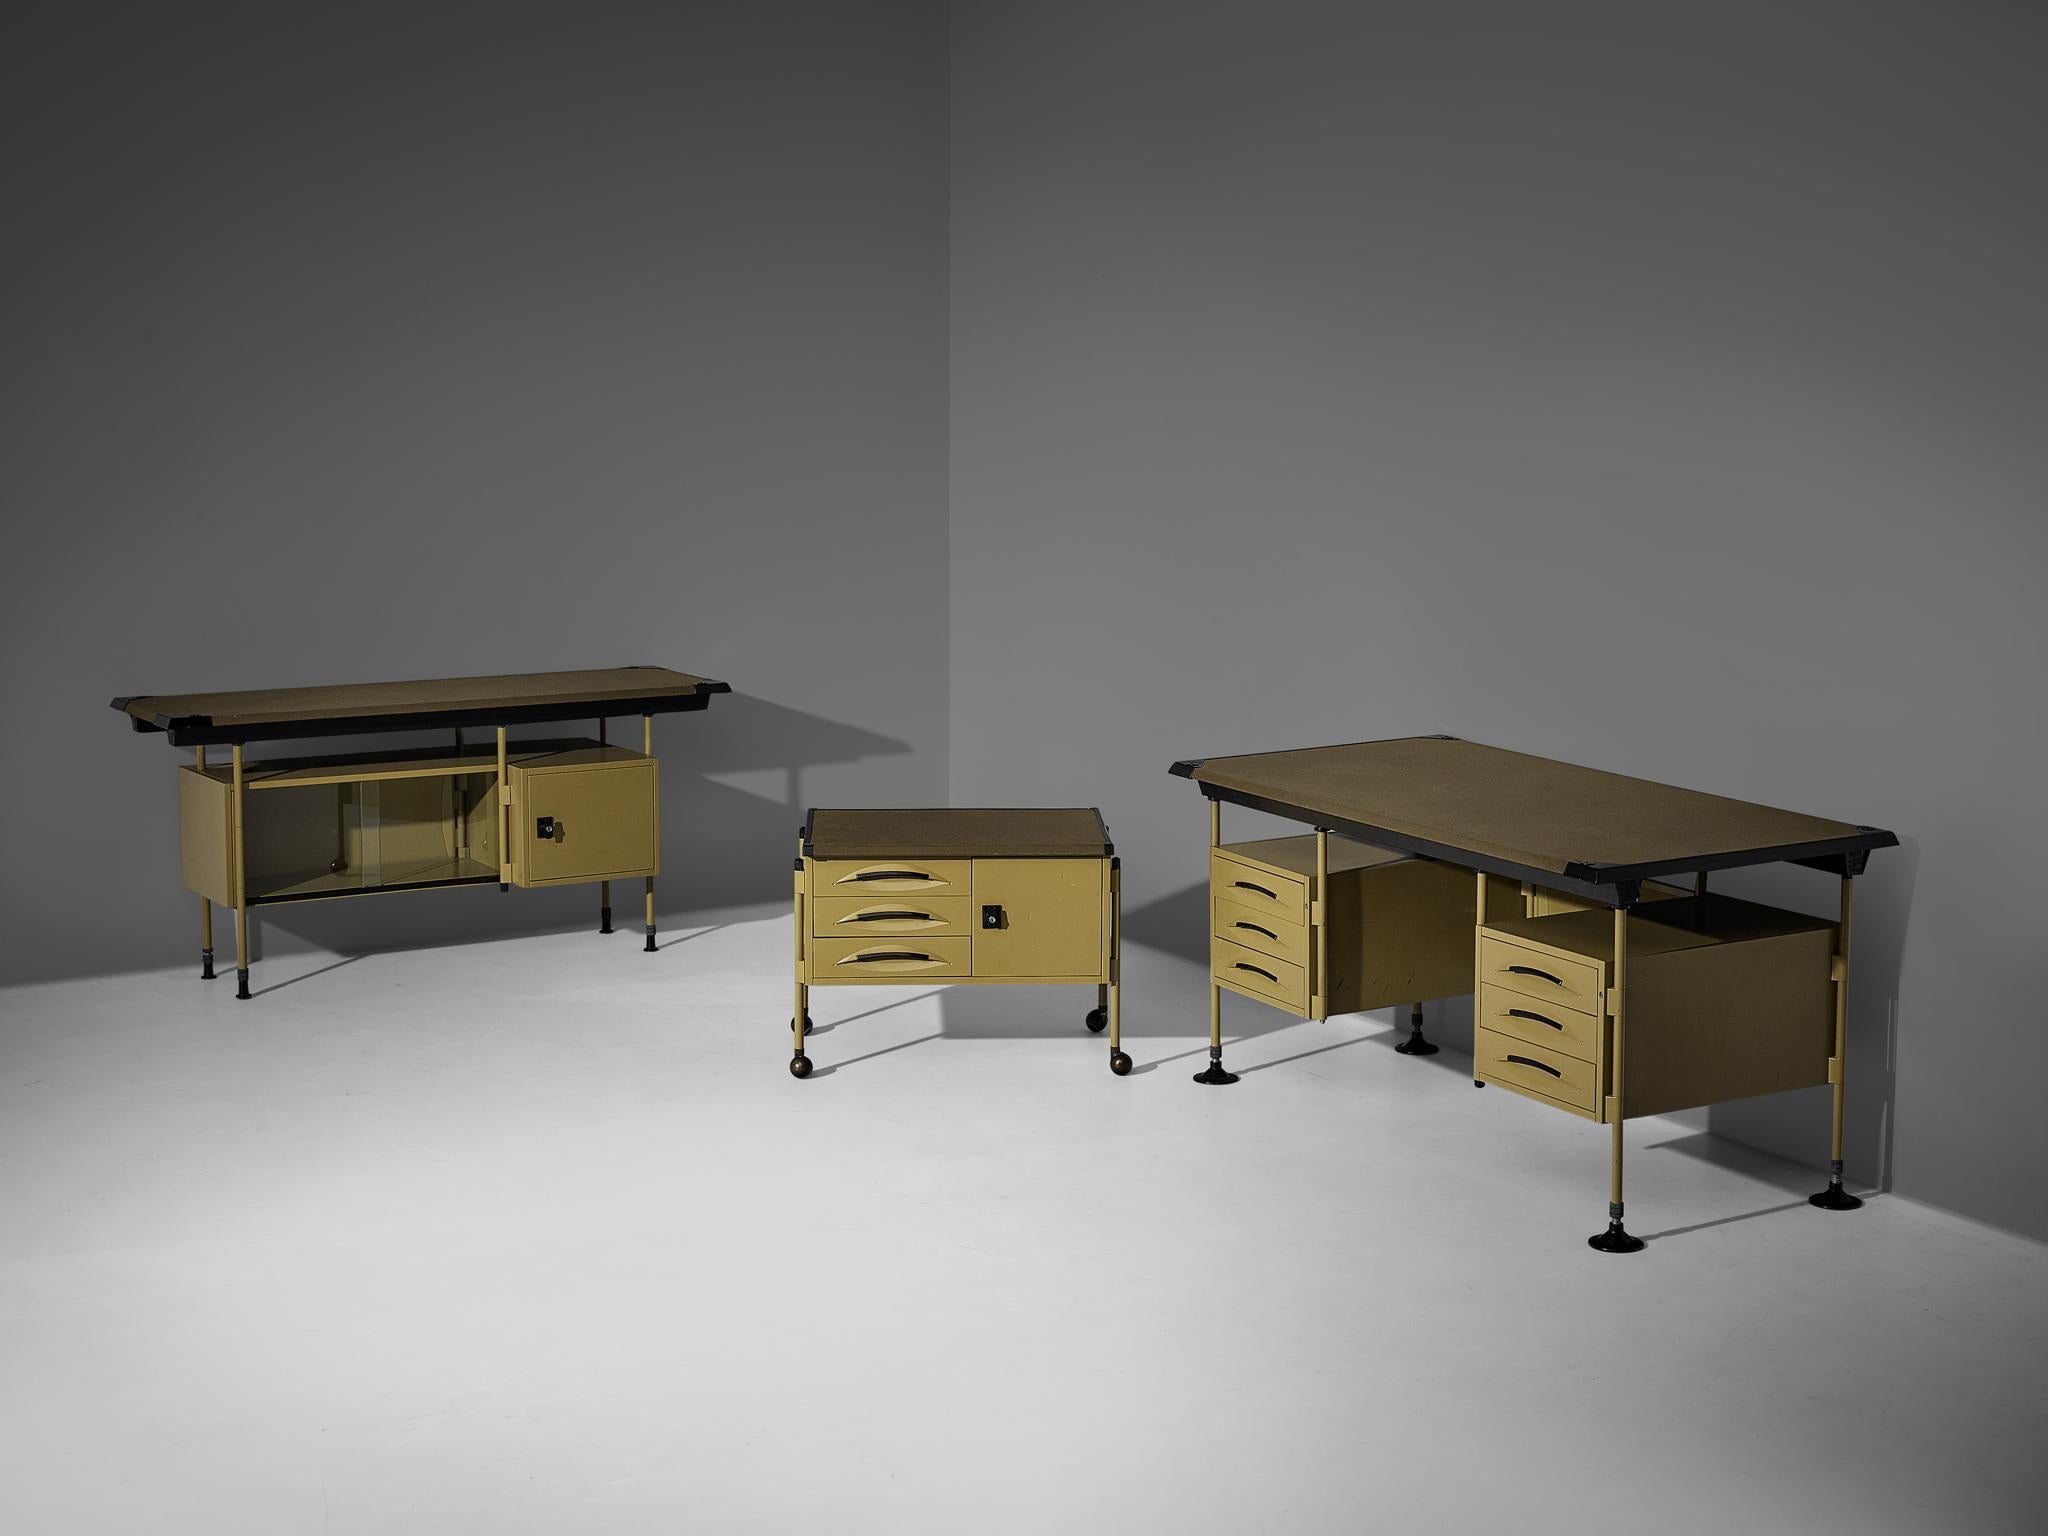 Studio BBPR for Olivetti, 'Spazio' set with desk with drawers sideboard and side table with drawers, steel, vinyl, plastic, Italy, ca. 1960 

This olive green industrial office set was designed by Studio BBPR for Olivetti in 1960. The 'Spazio'